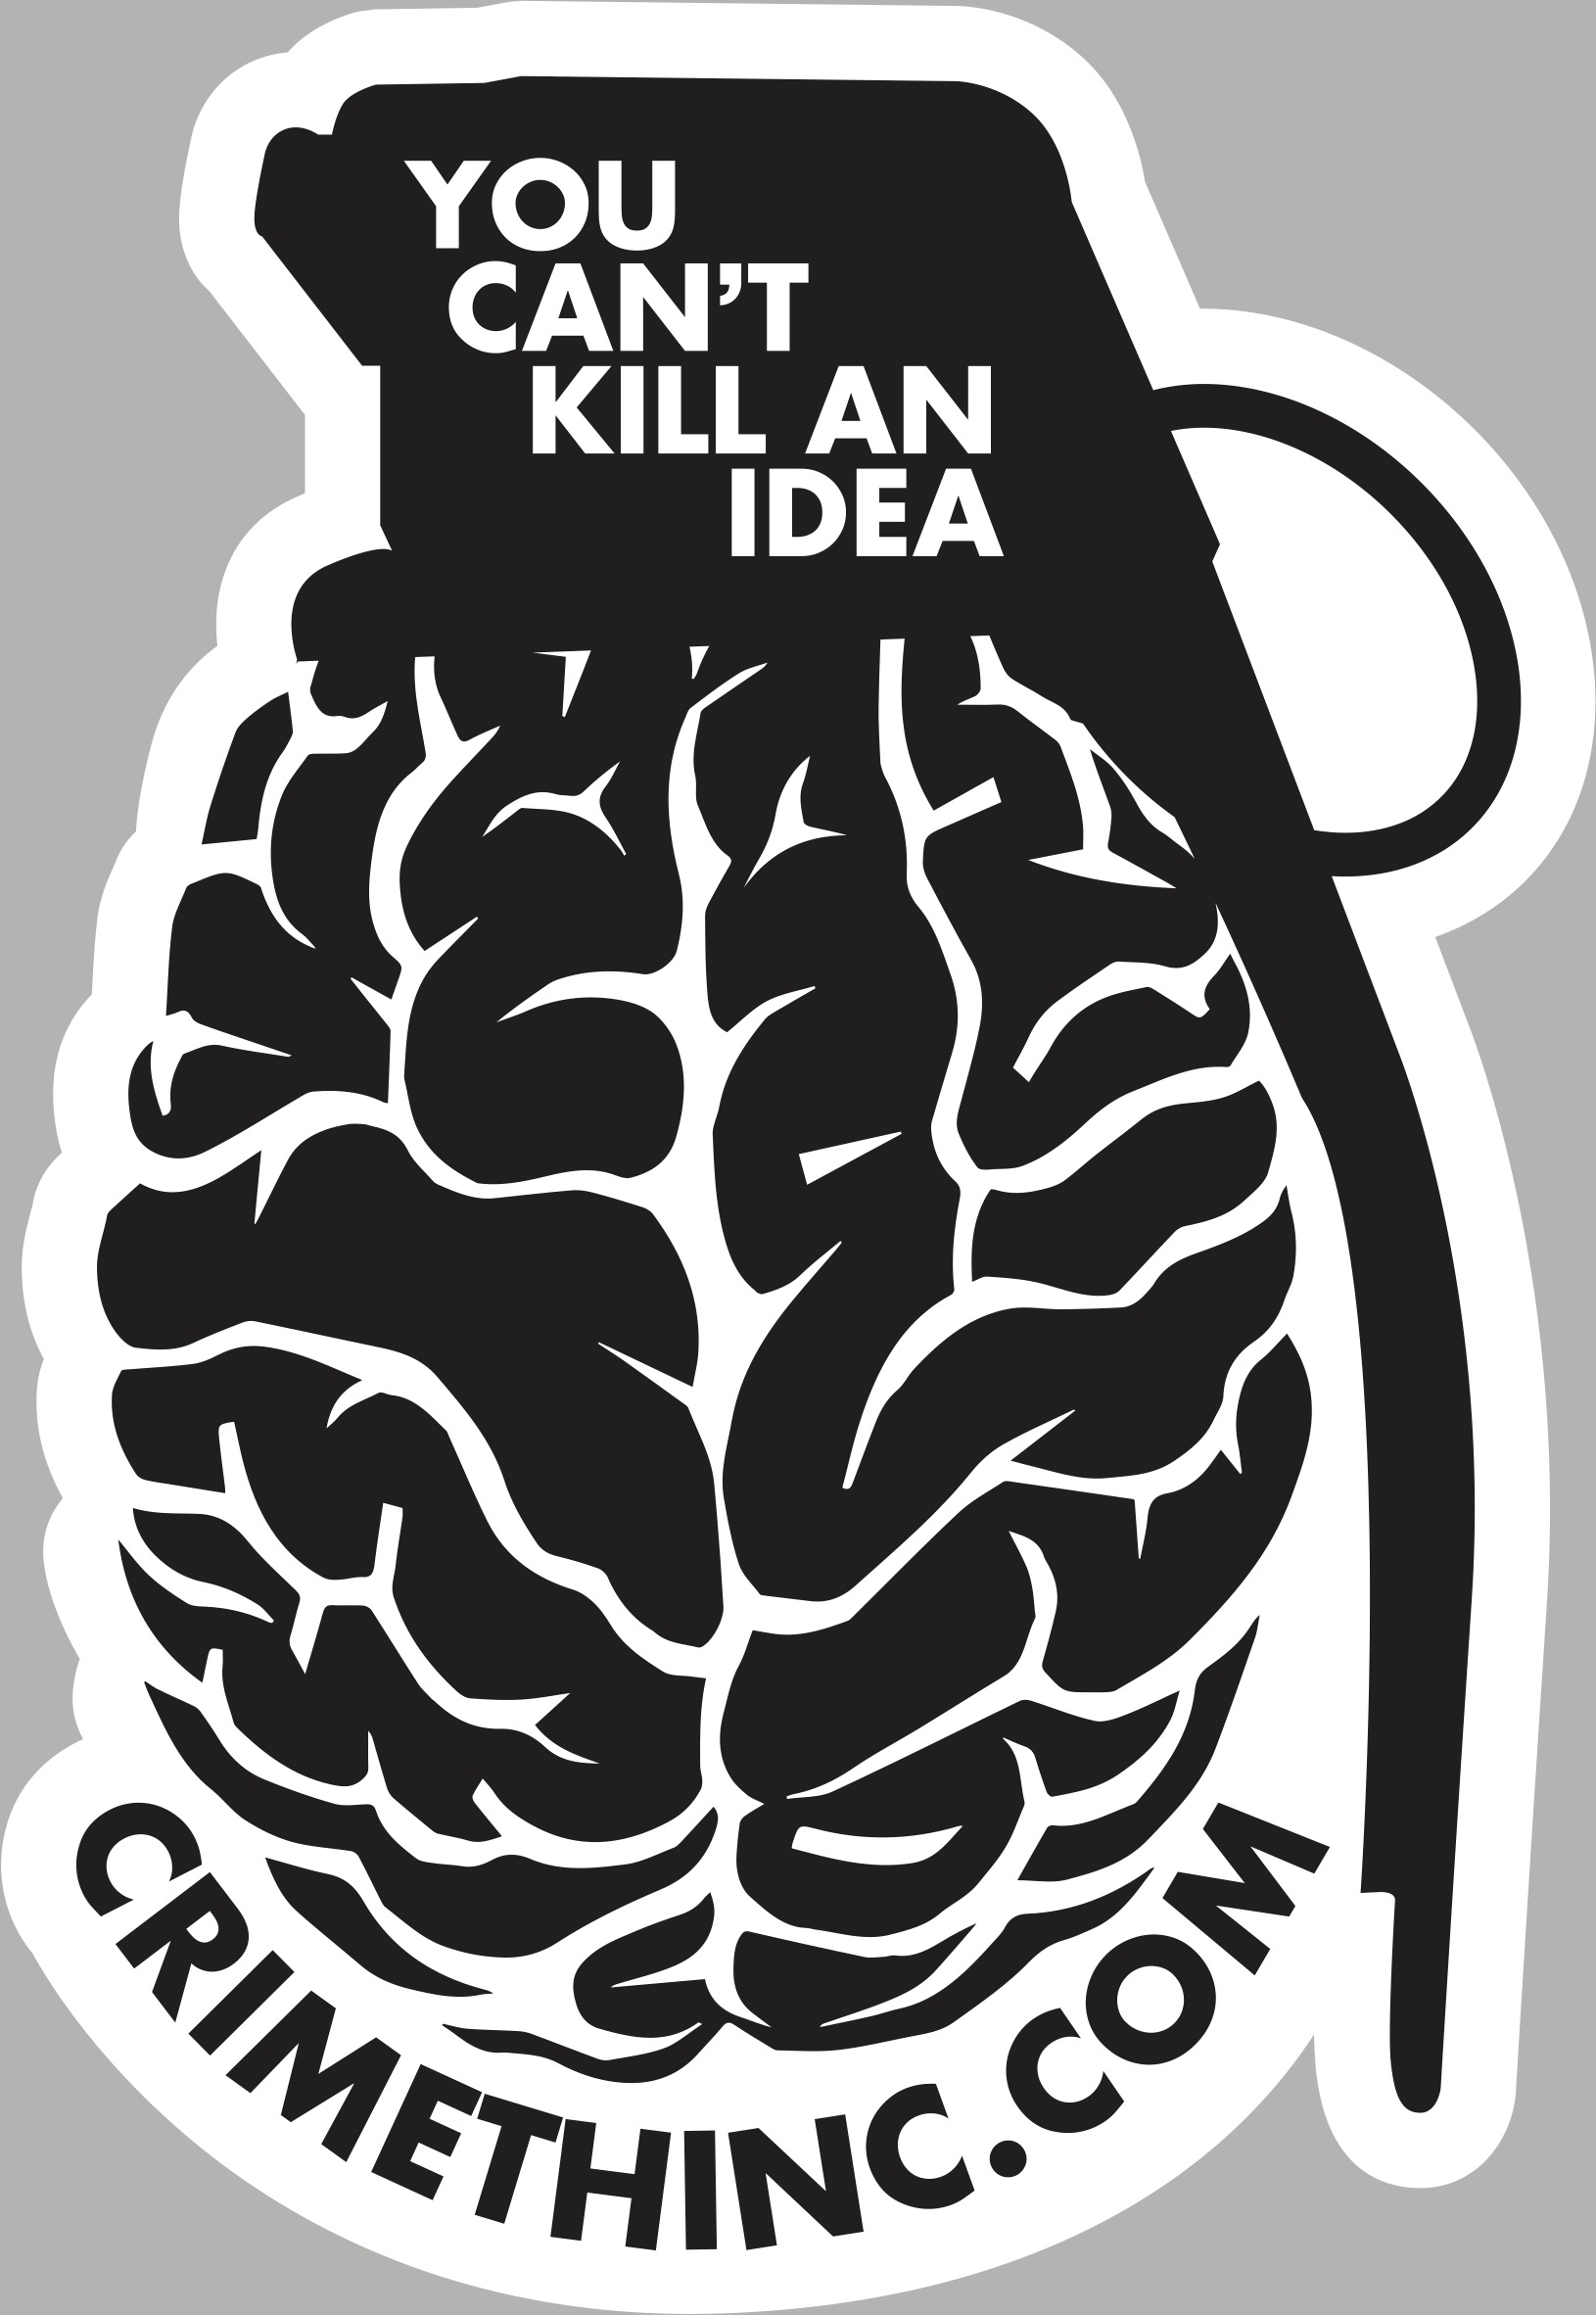 Photo of ‘You Can't Kill an Idea’ front side